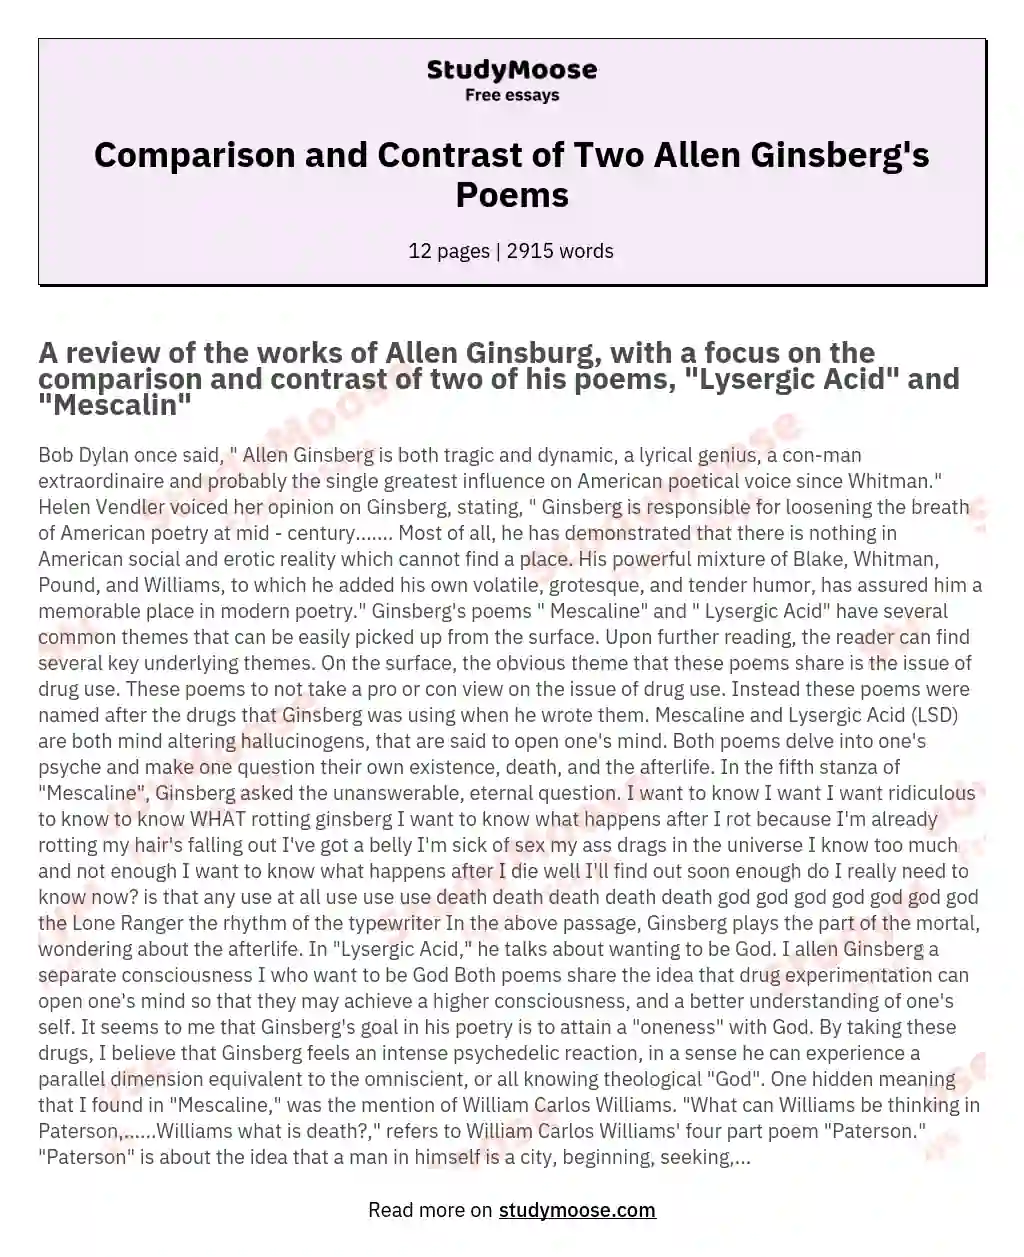 Comparison and Contrast of Two Allen Ginsberg's Poems